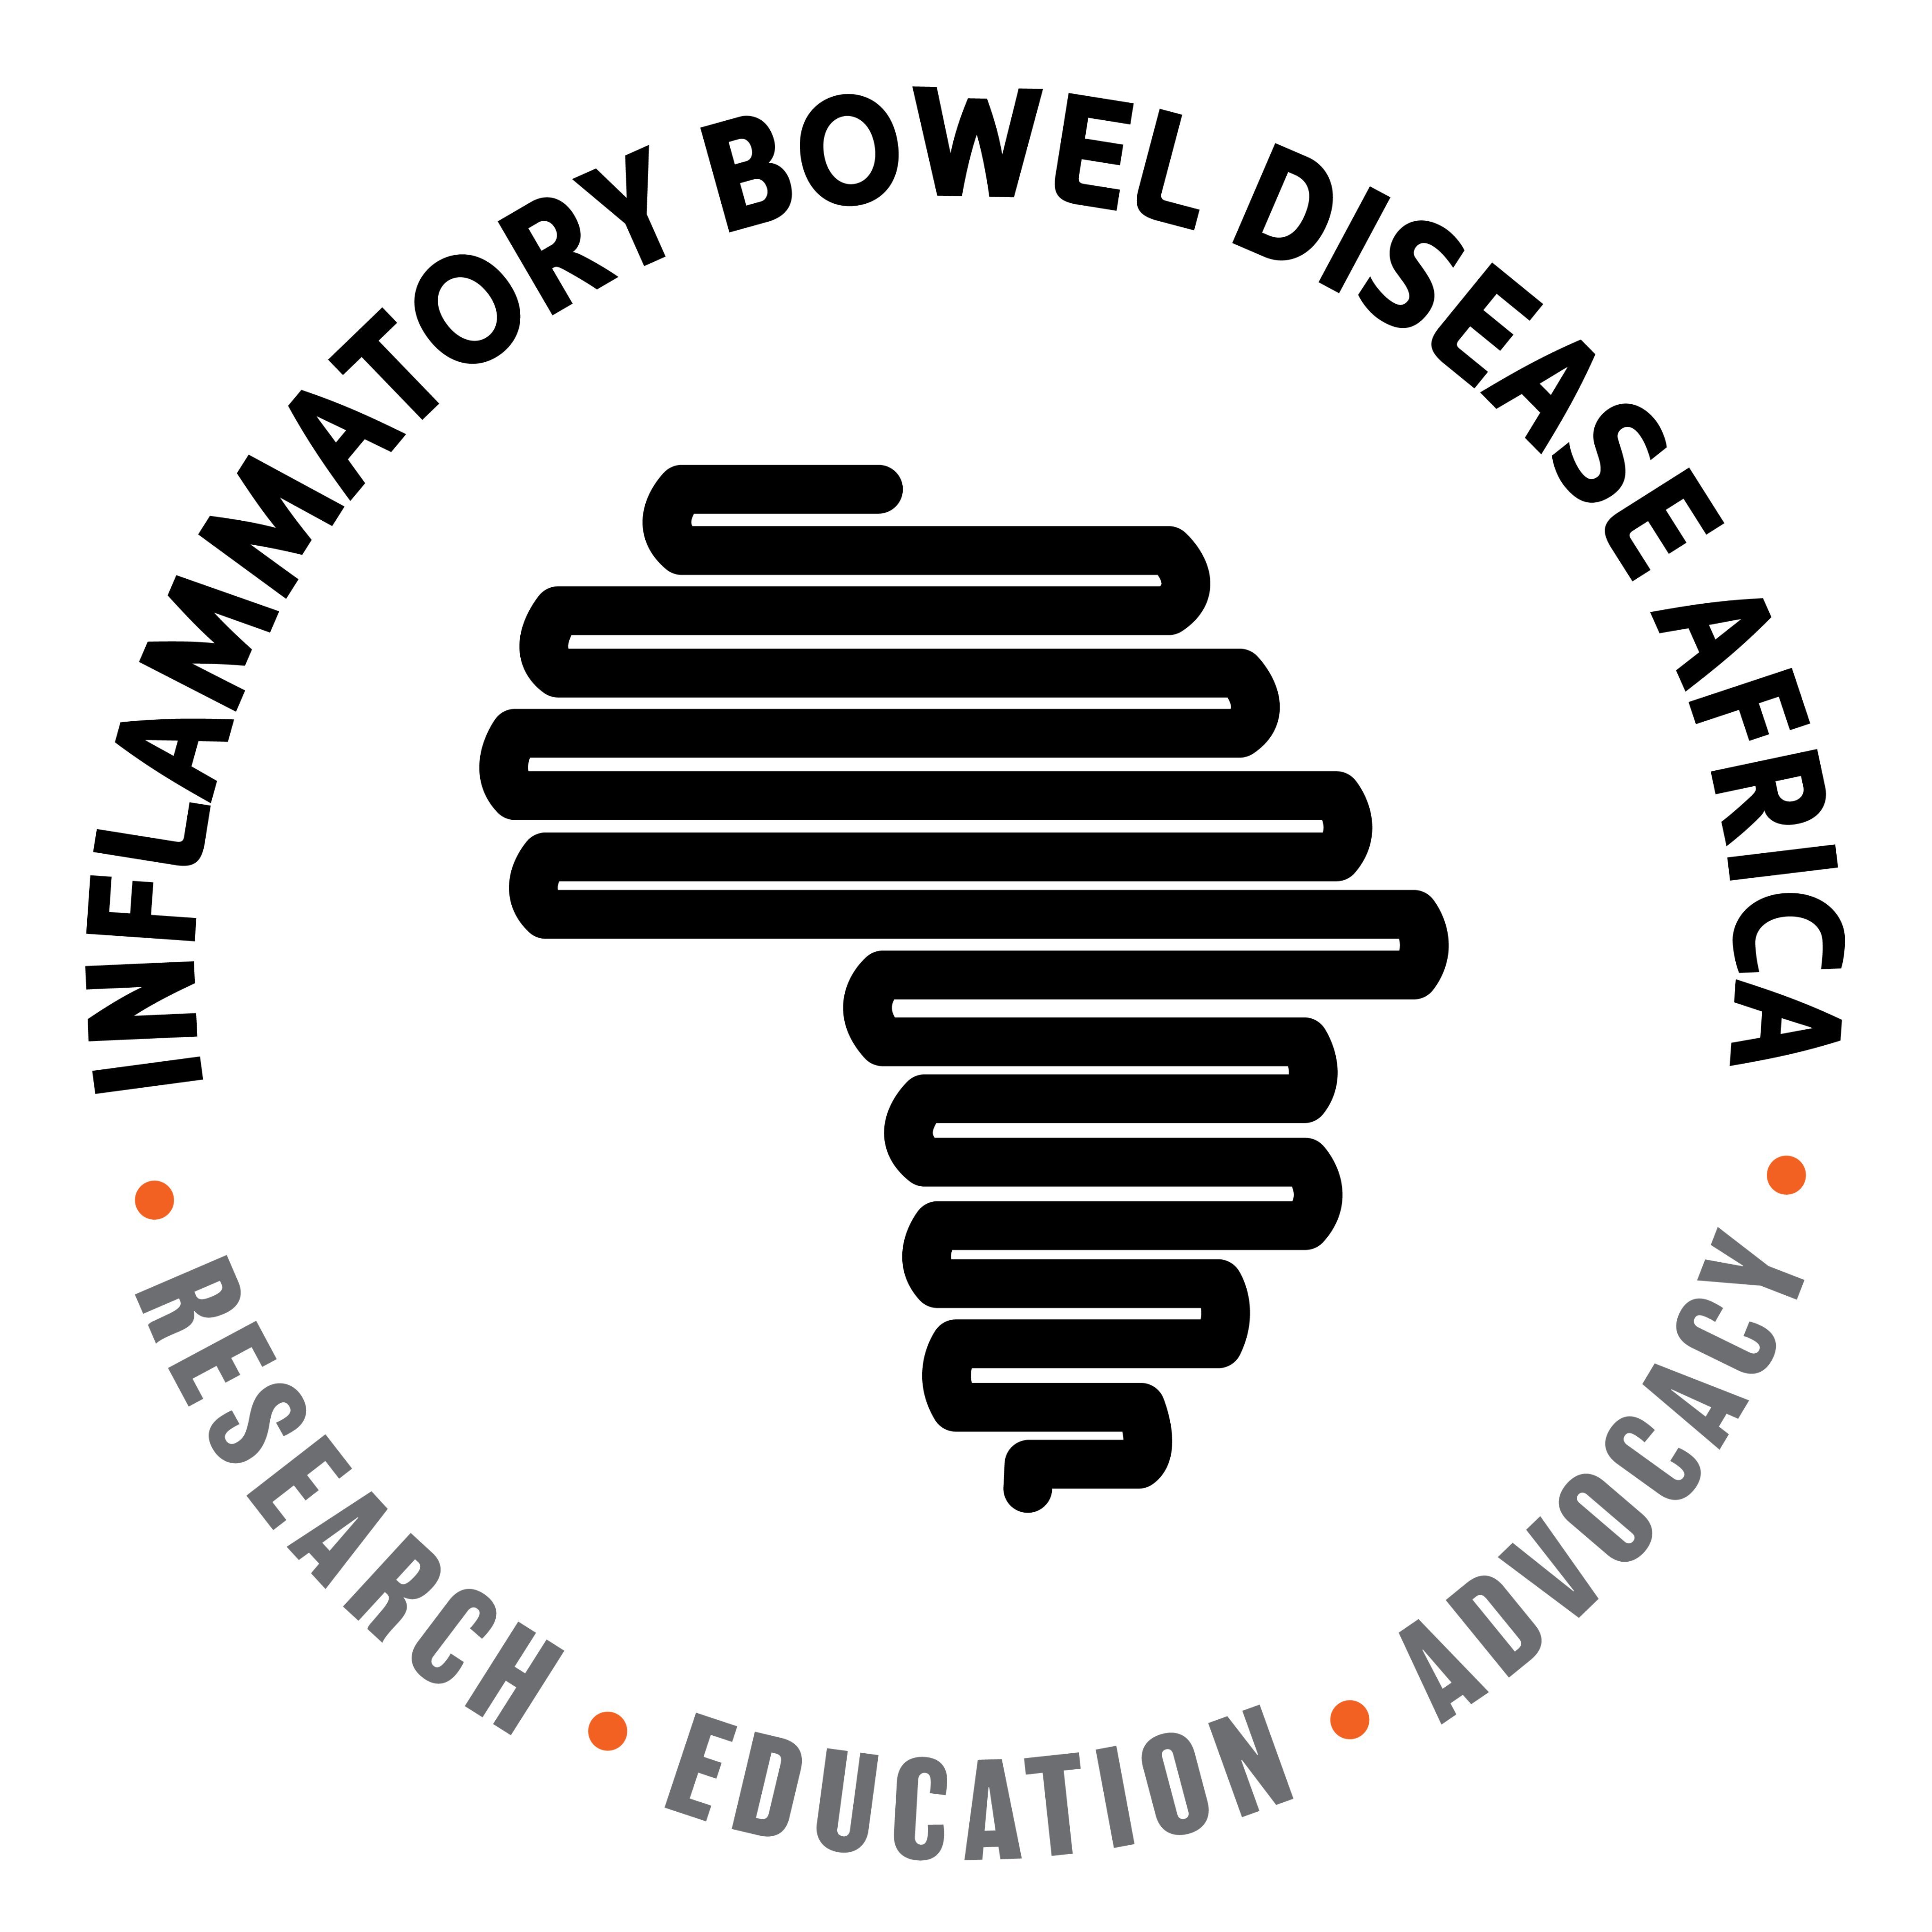 Inflammatory Bowel Disease Africa is a non-profit organisation with a mandate to improve IBD care in Sub-Saharan Africa through Research, Education and Advocacy